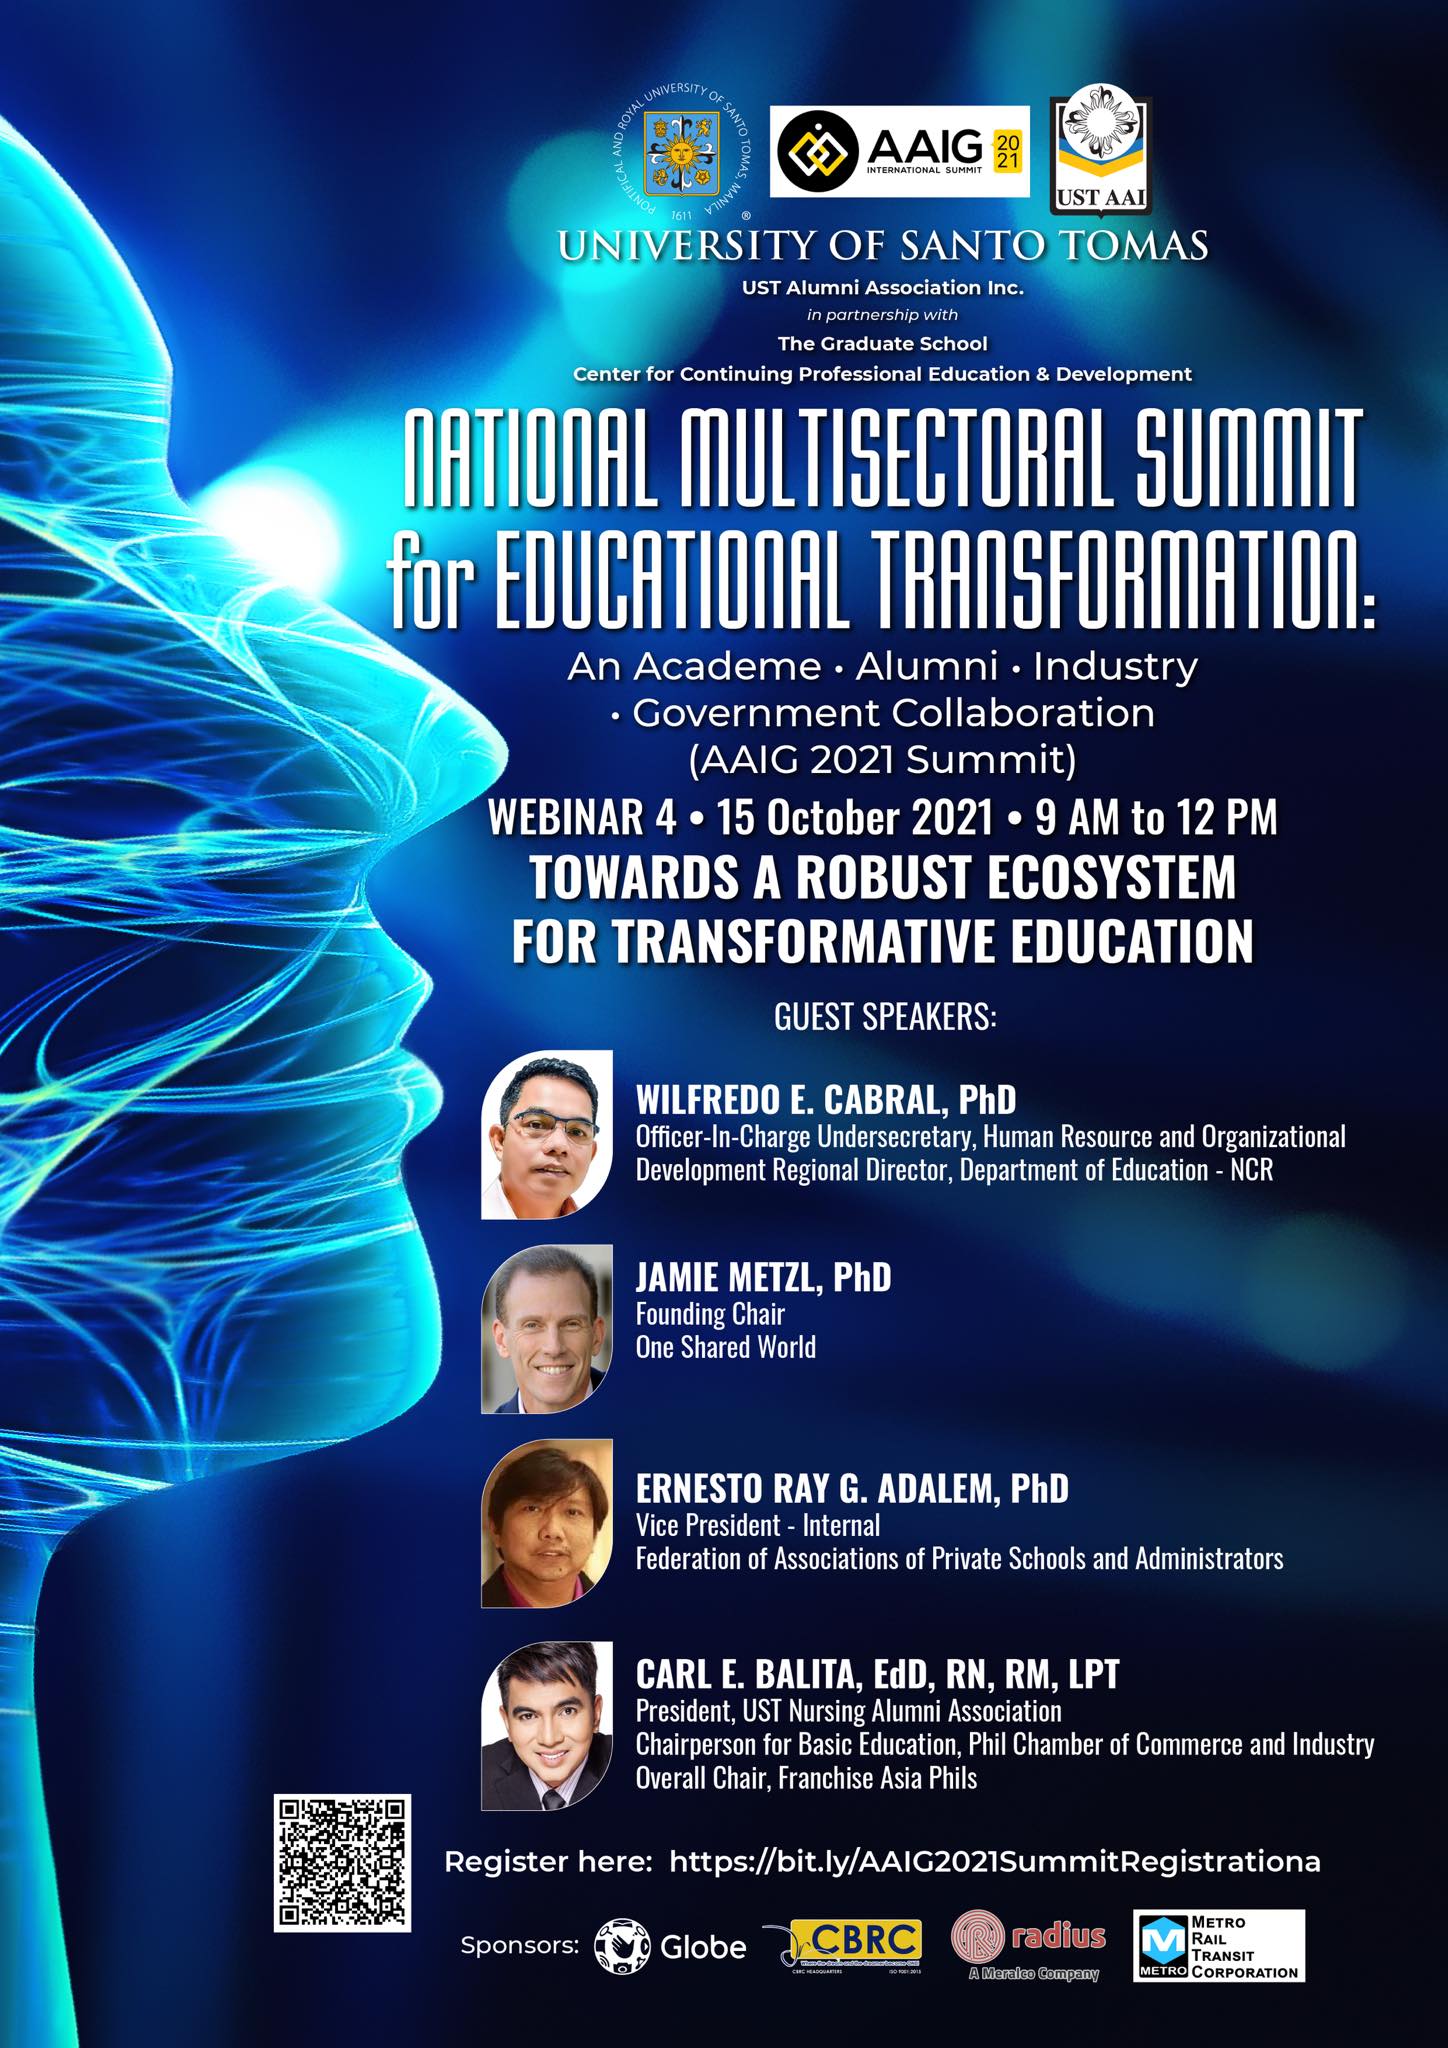 National Multisectorial Summit for Educational Transformation